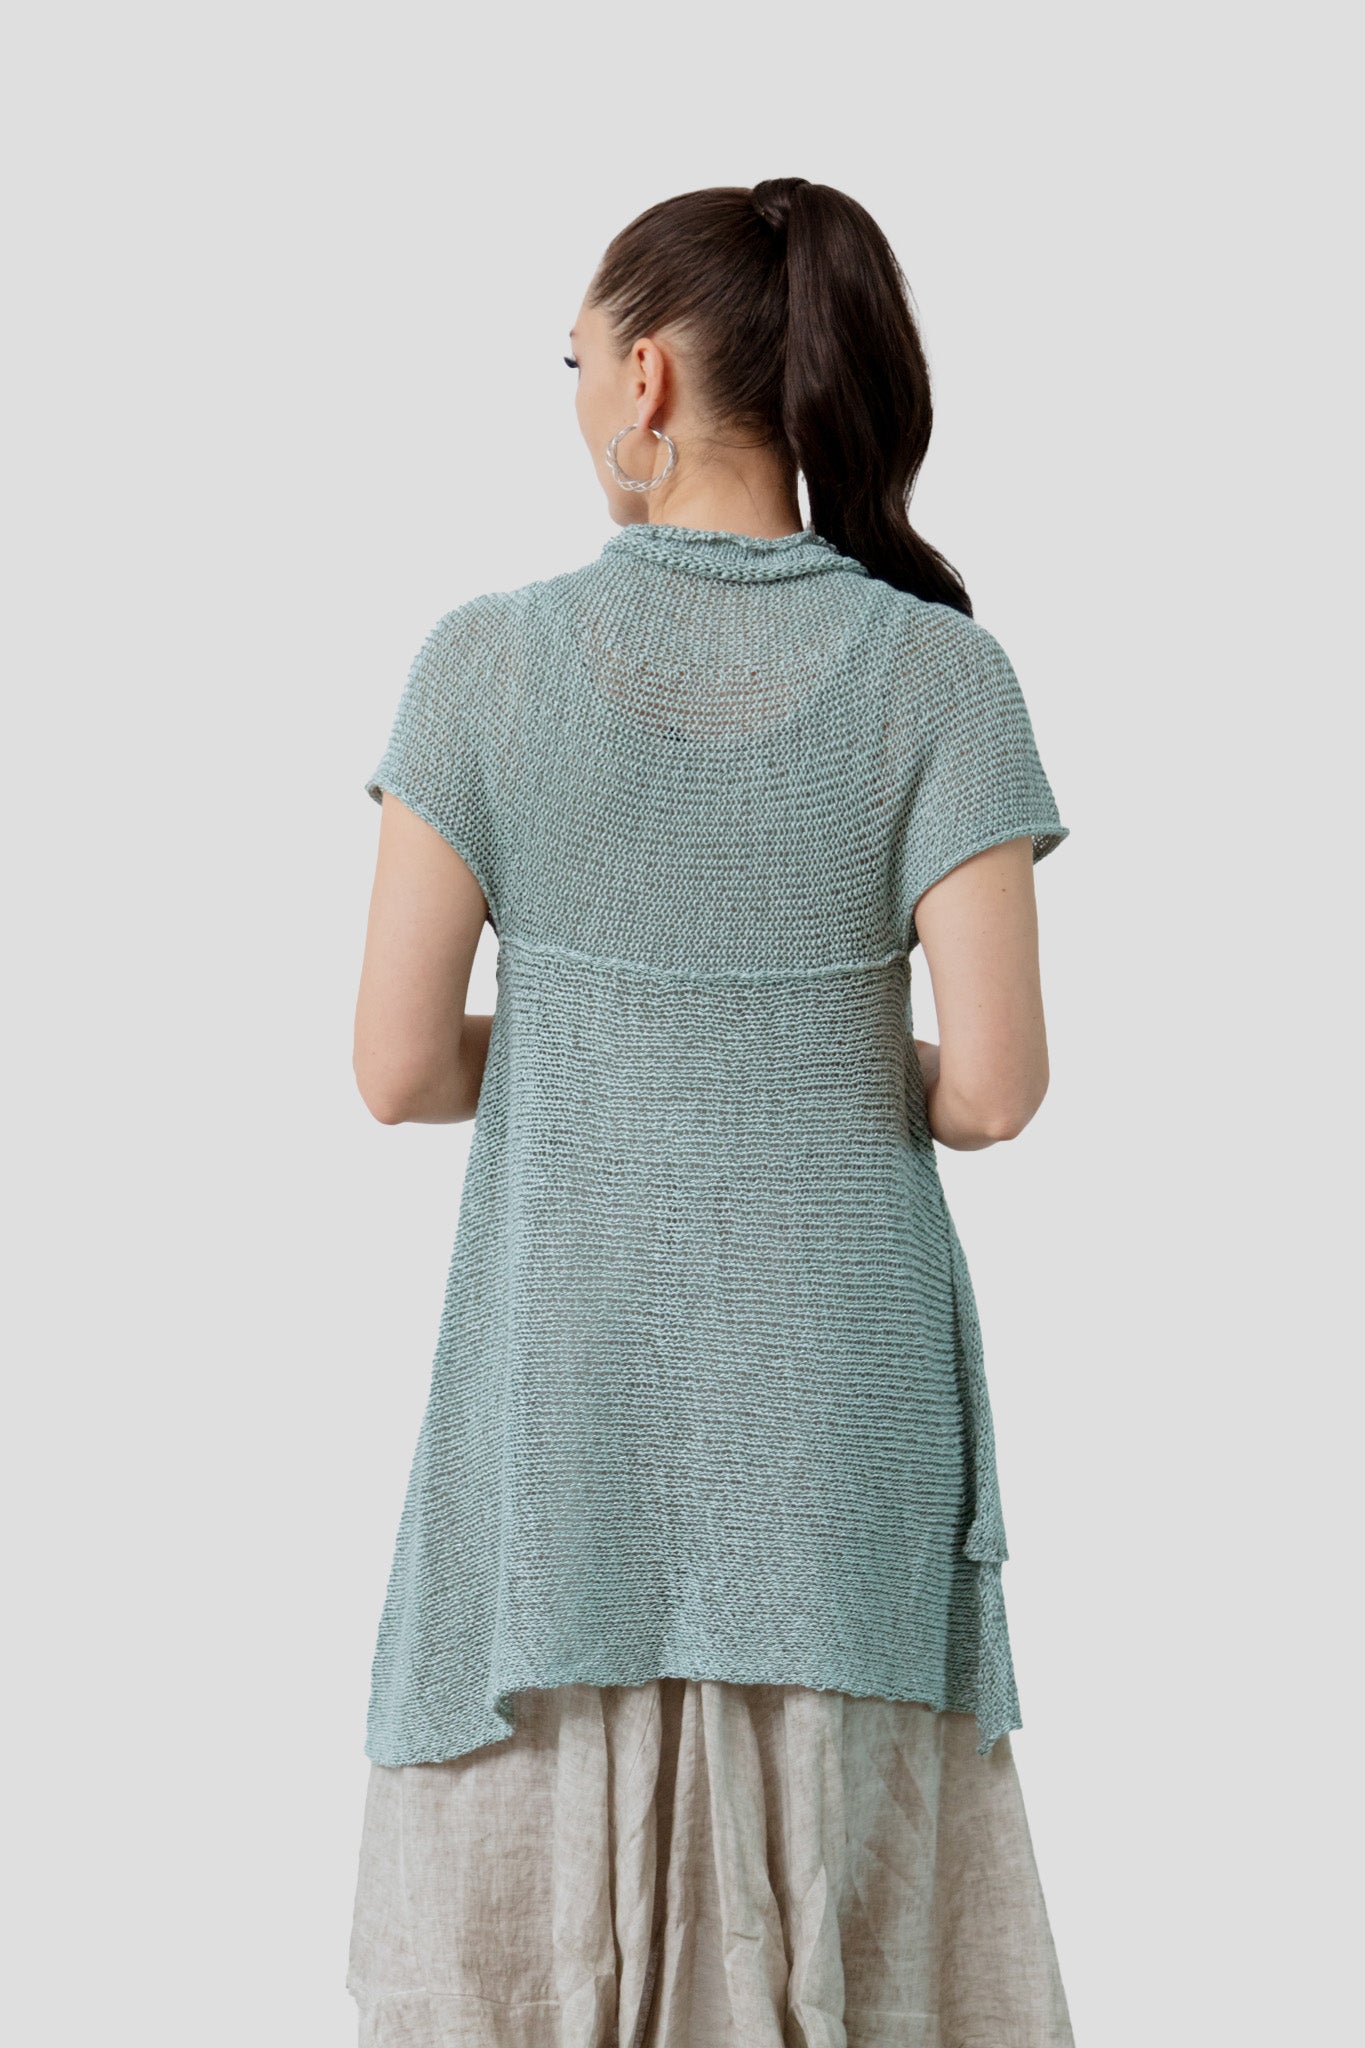 3184 Knitted Tunic, White